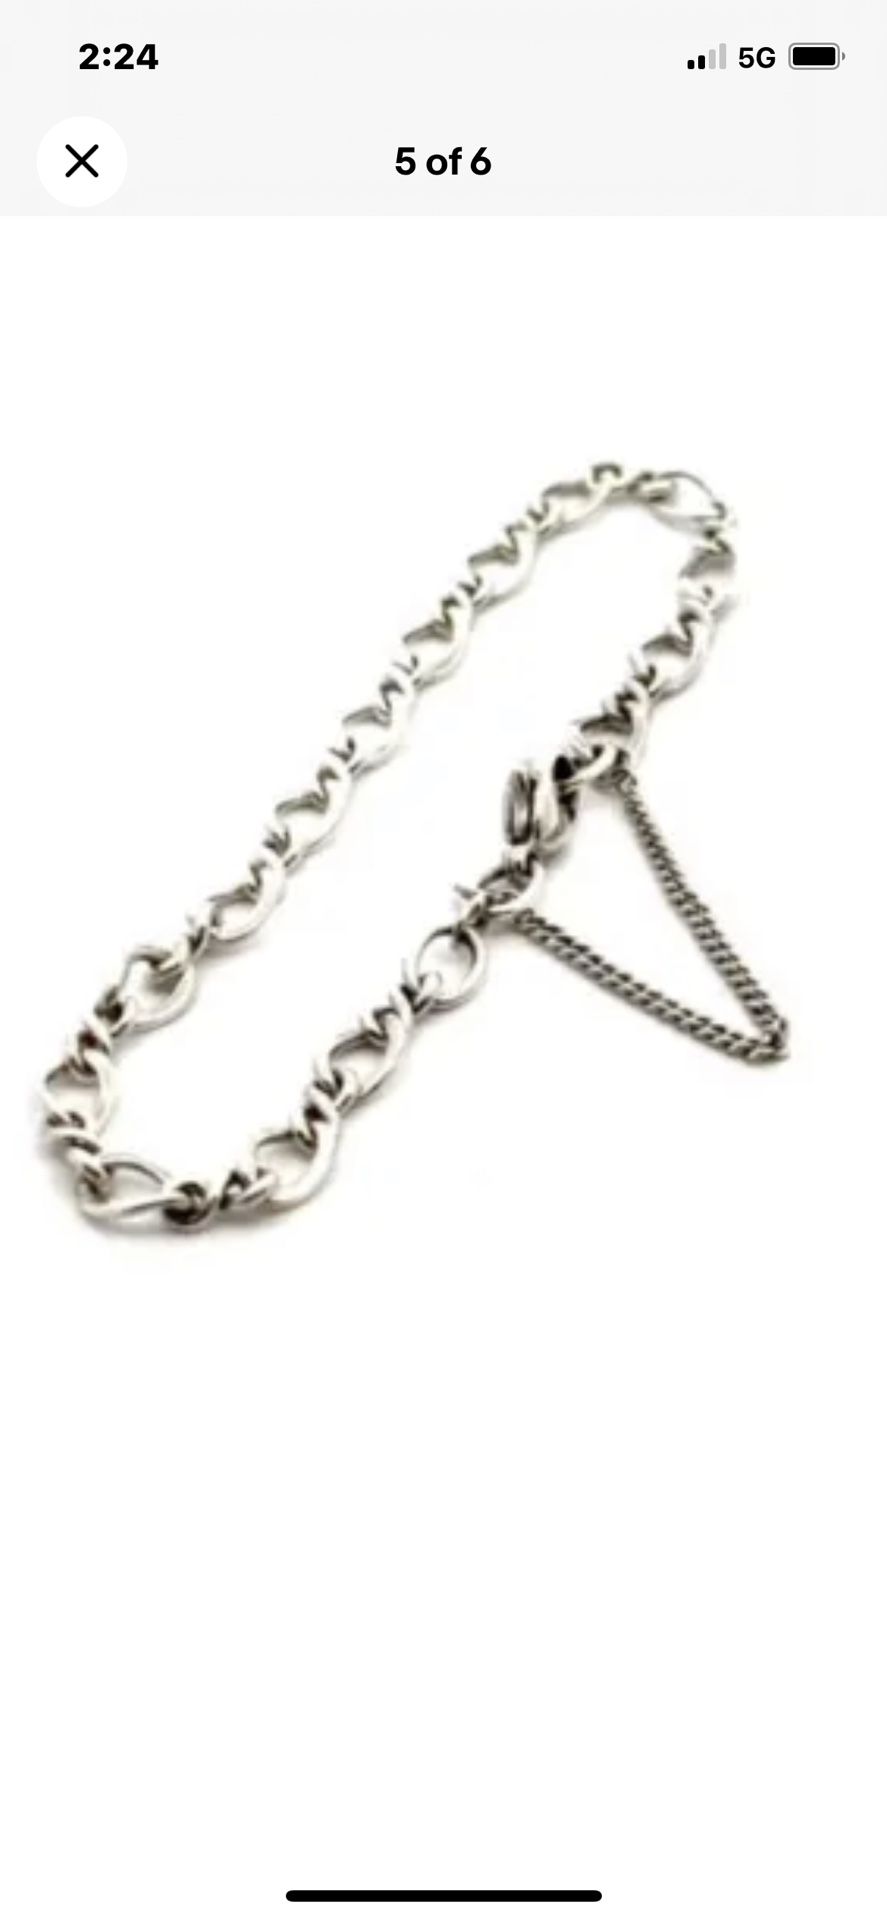 James Avery Silver Bracelet . Charm Style Lobster Clasp. Safety Chain Nice 